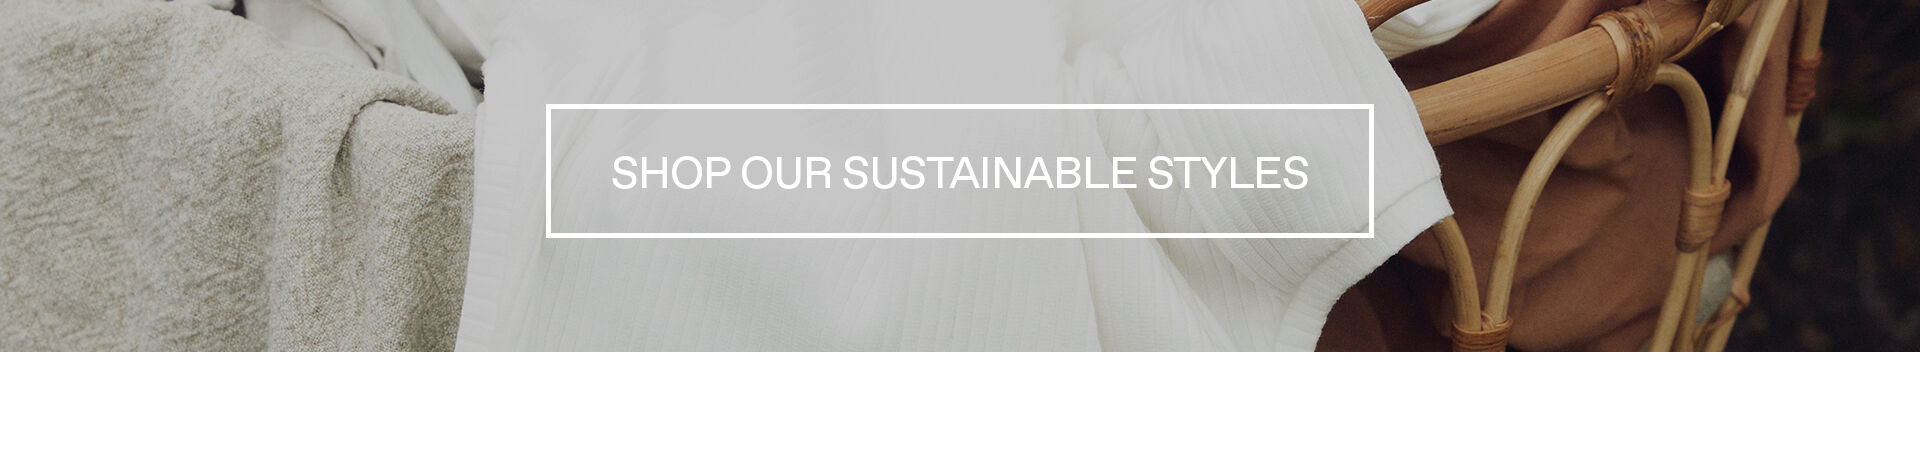 Shop our sustainable styles